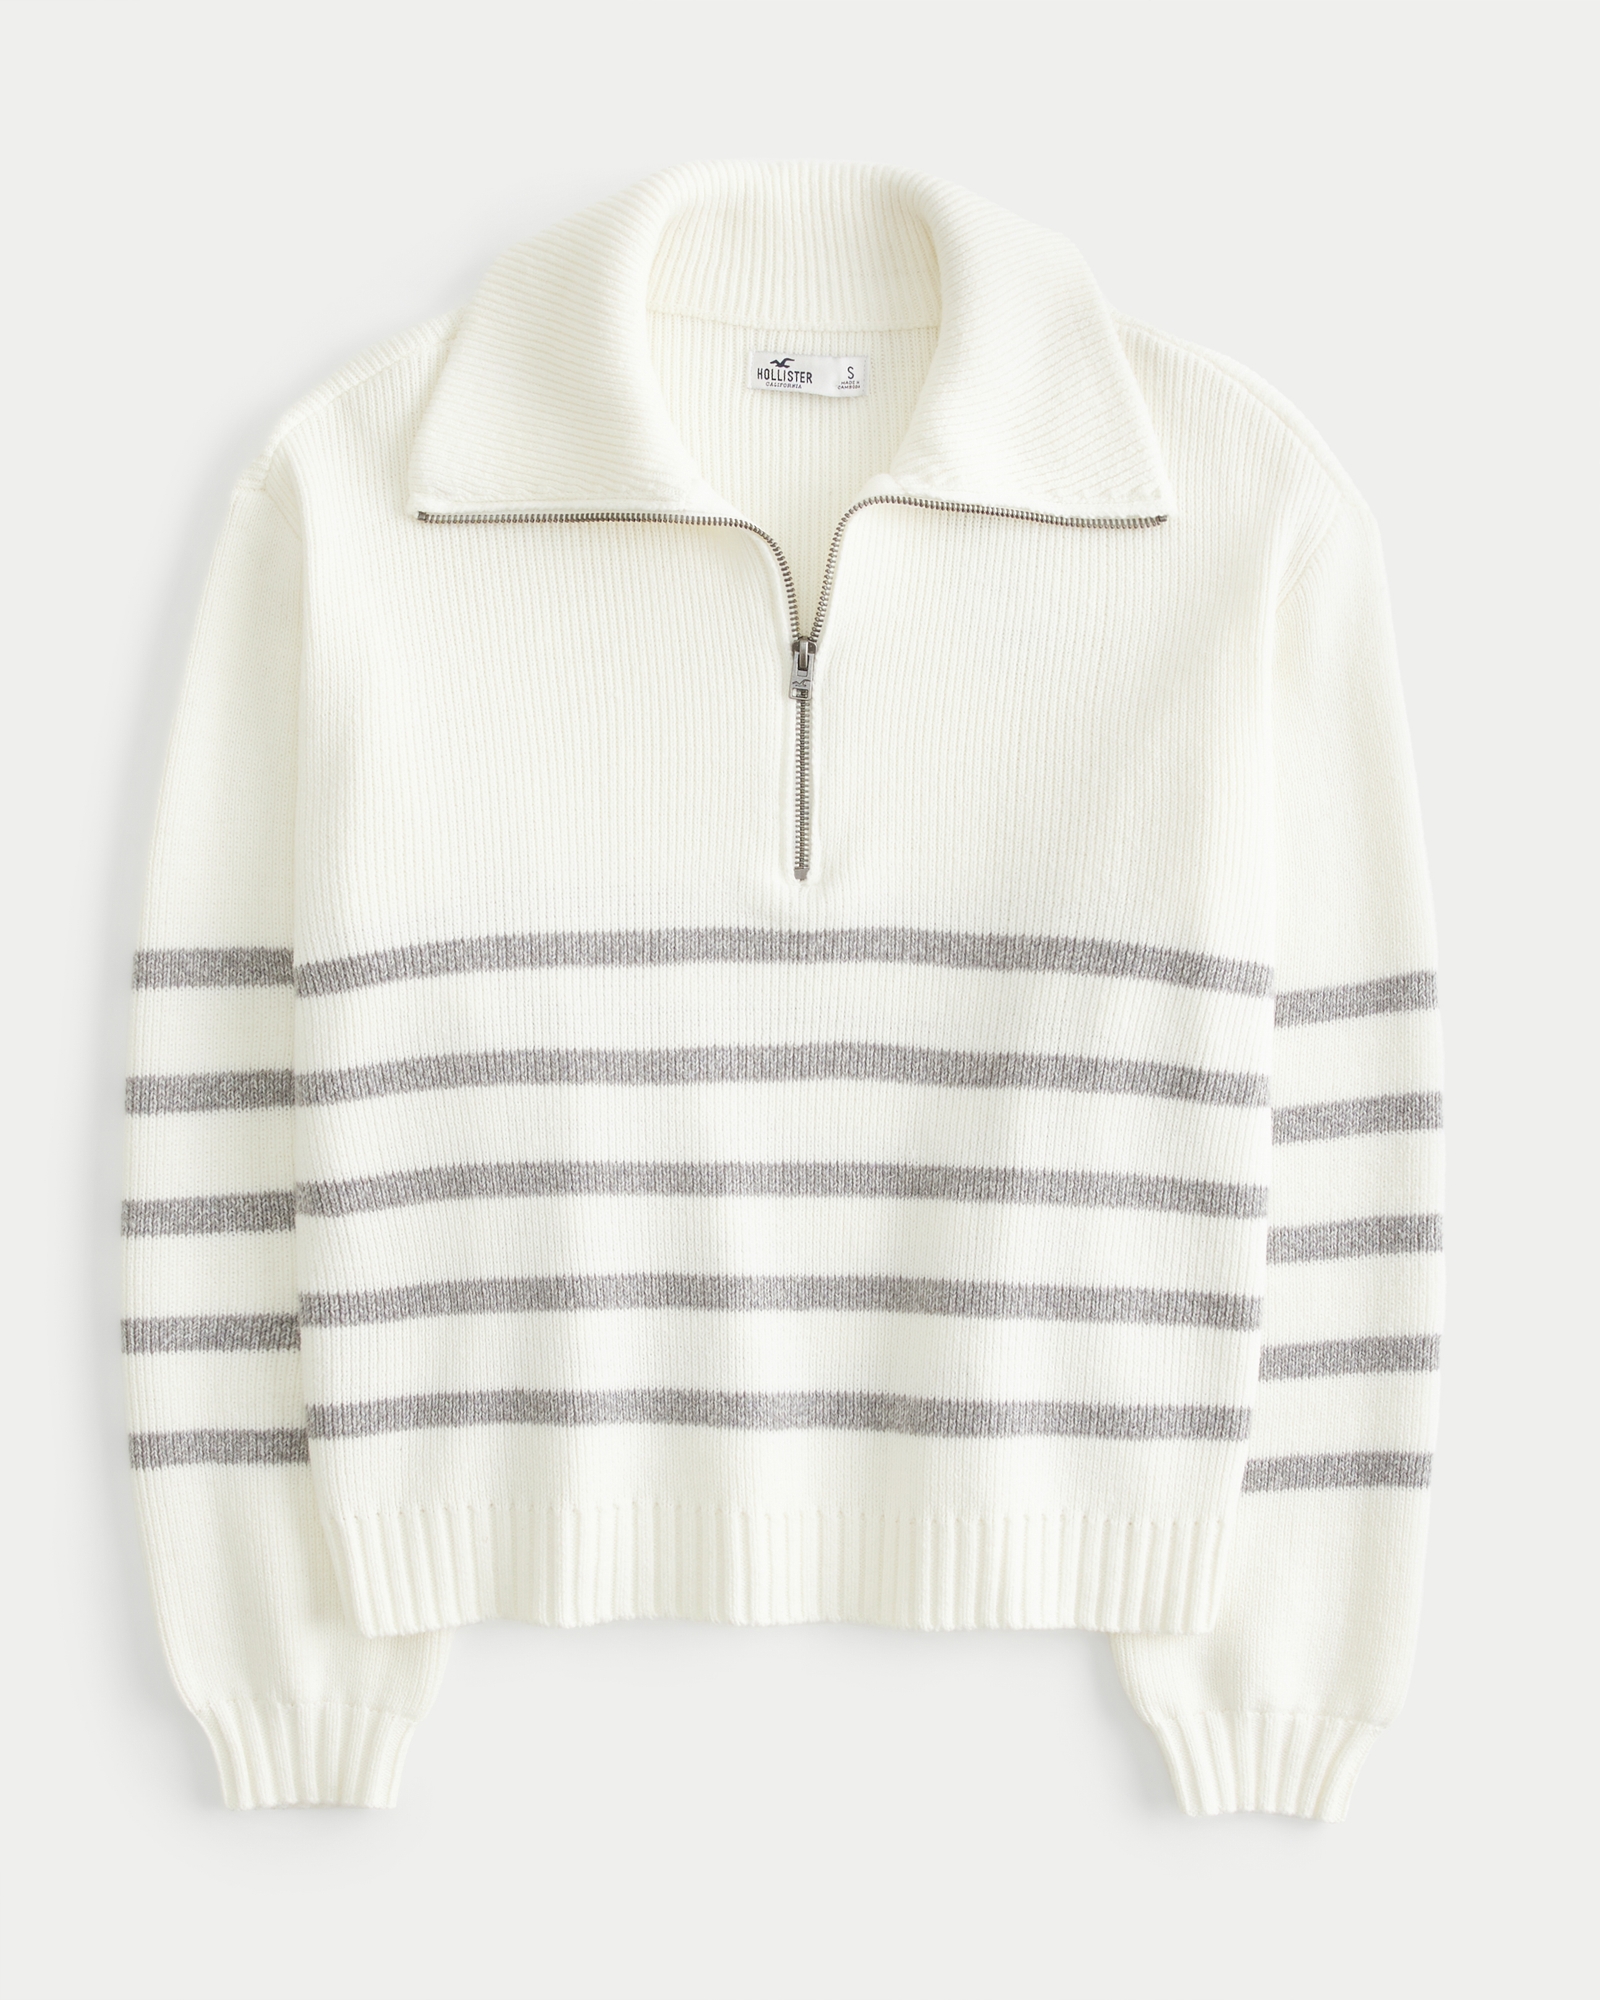 Hollister White Sweater Size M - $10 (77% Off Retail) - From Kathryn